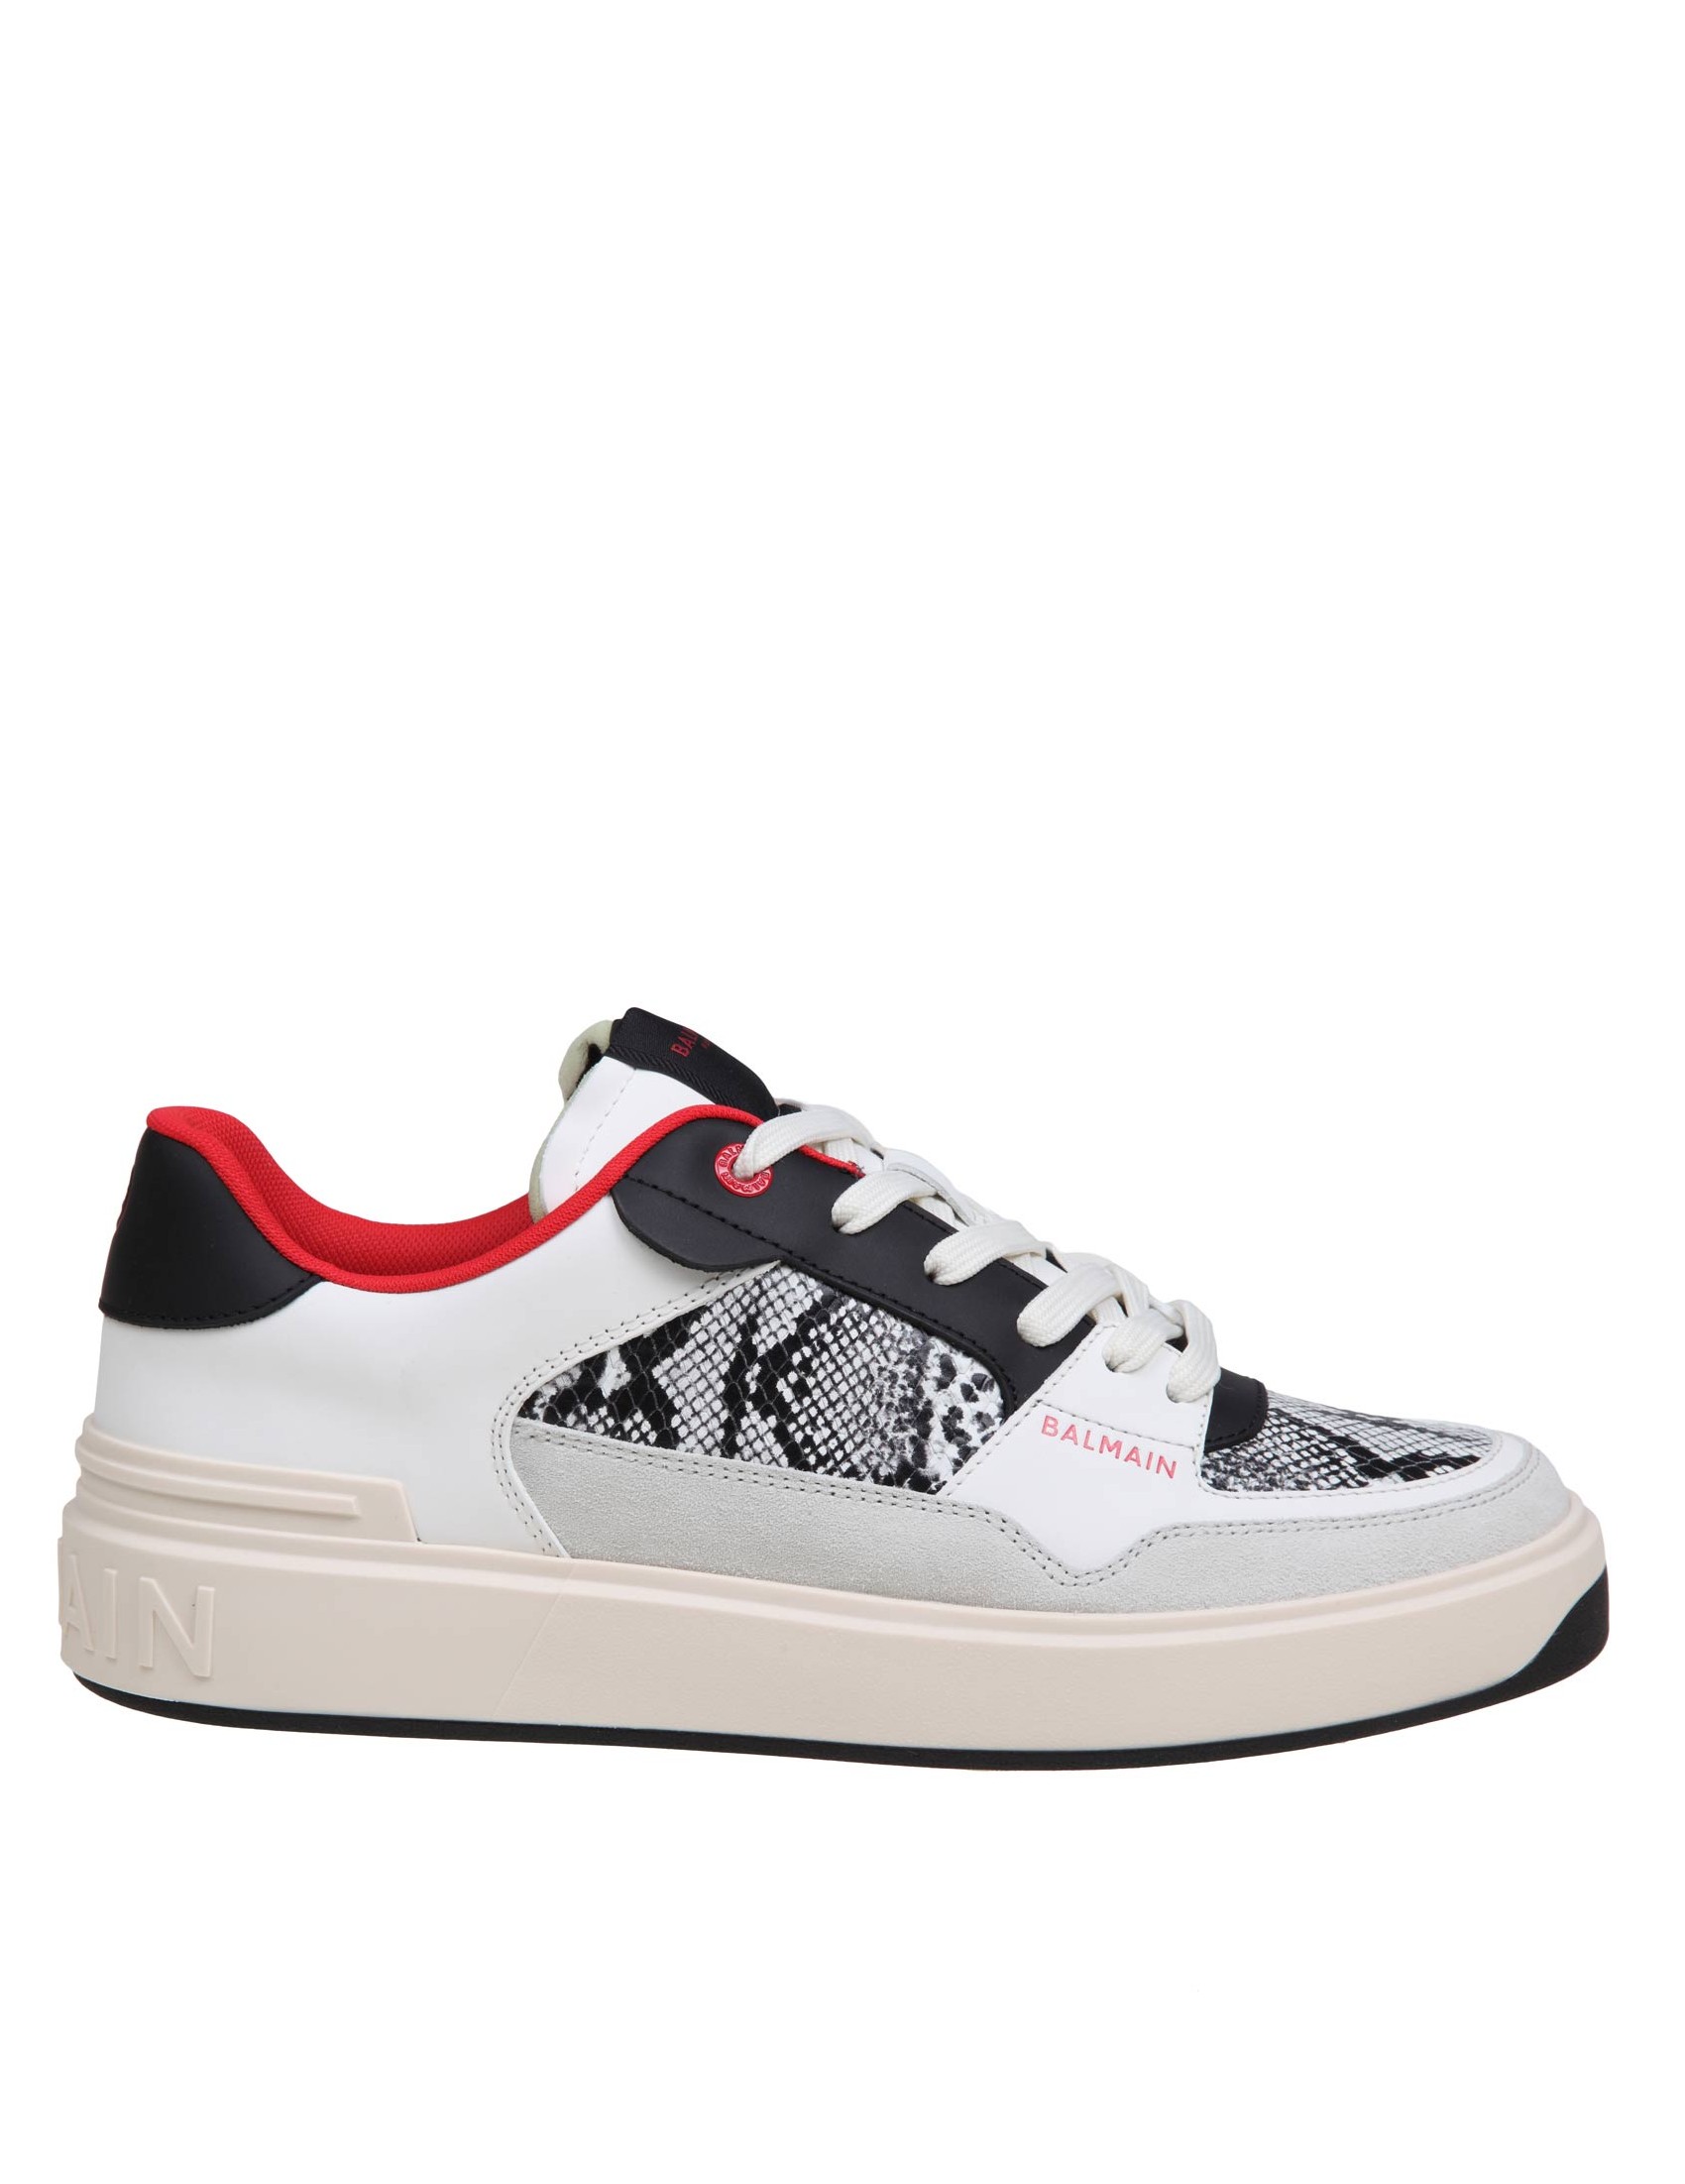 BALMAIN B-COURT FLIP SNEAKERS IN PYTHON EFFECT LEATHER